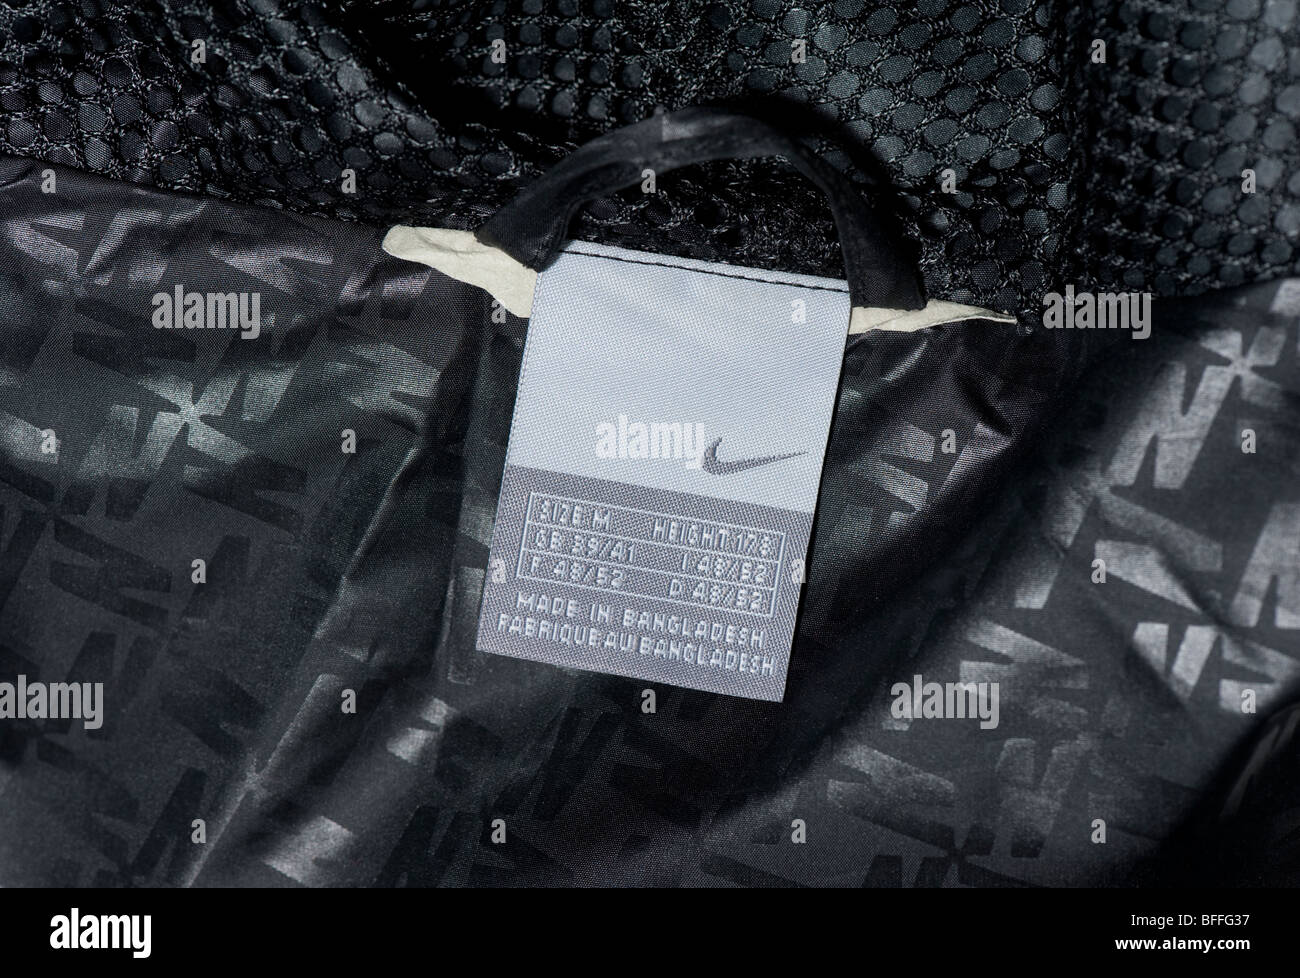 history of nike tags